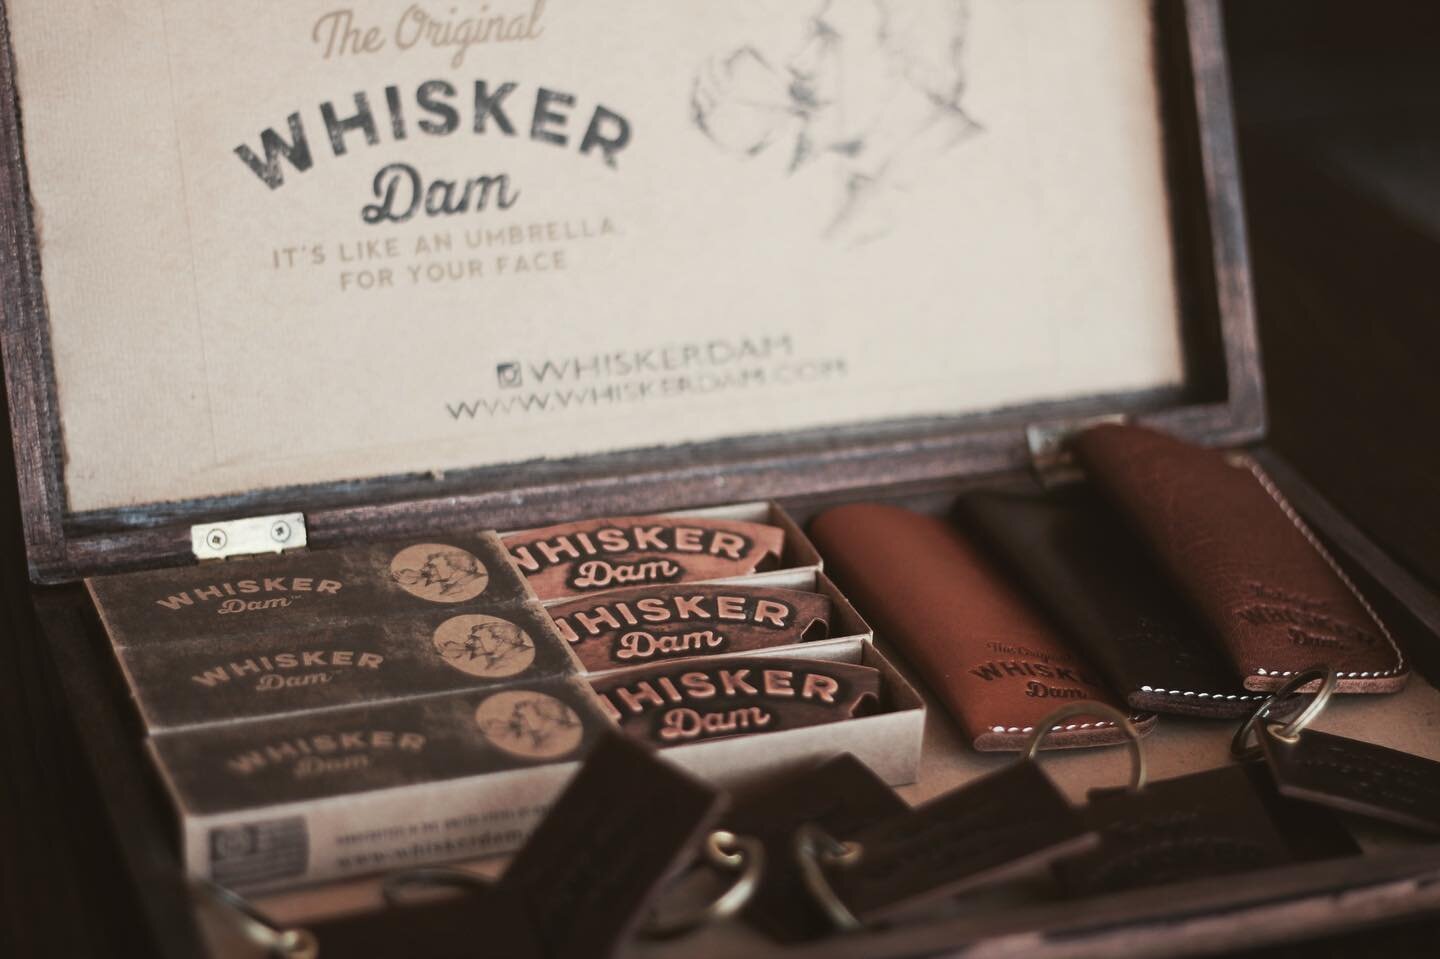 -WHISKER DAM- 
Premium vintage products wise beyond our years. 
#timeless #vintage #craft #mustache #beard #forhim